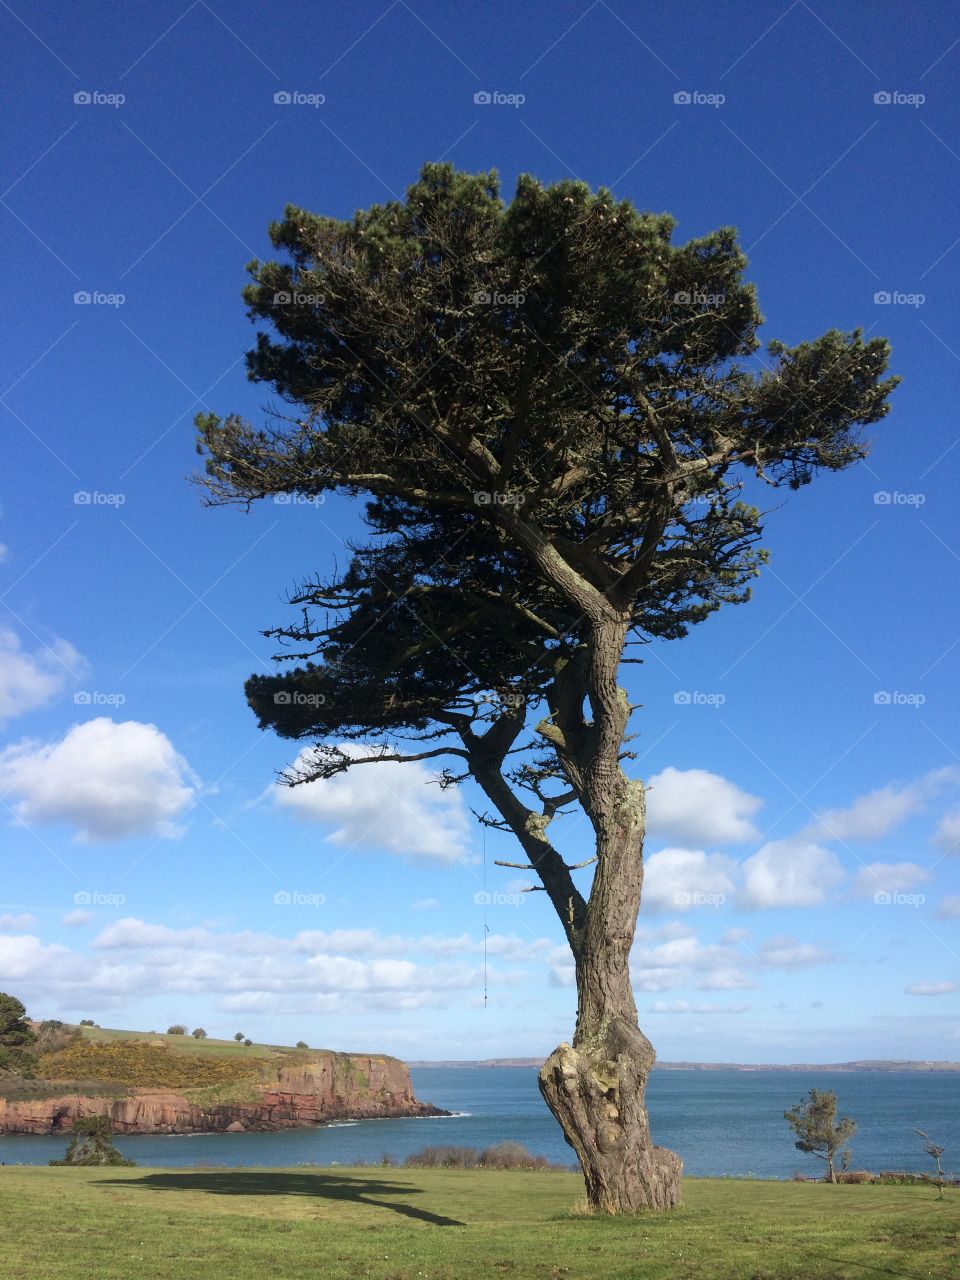 Tall tree in a park overlooking a bay